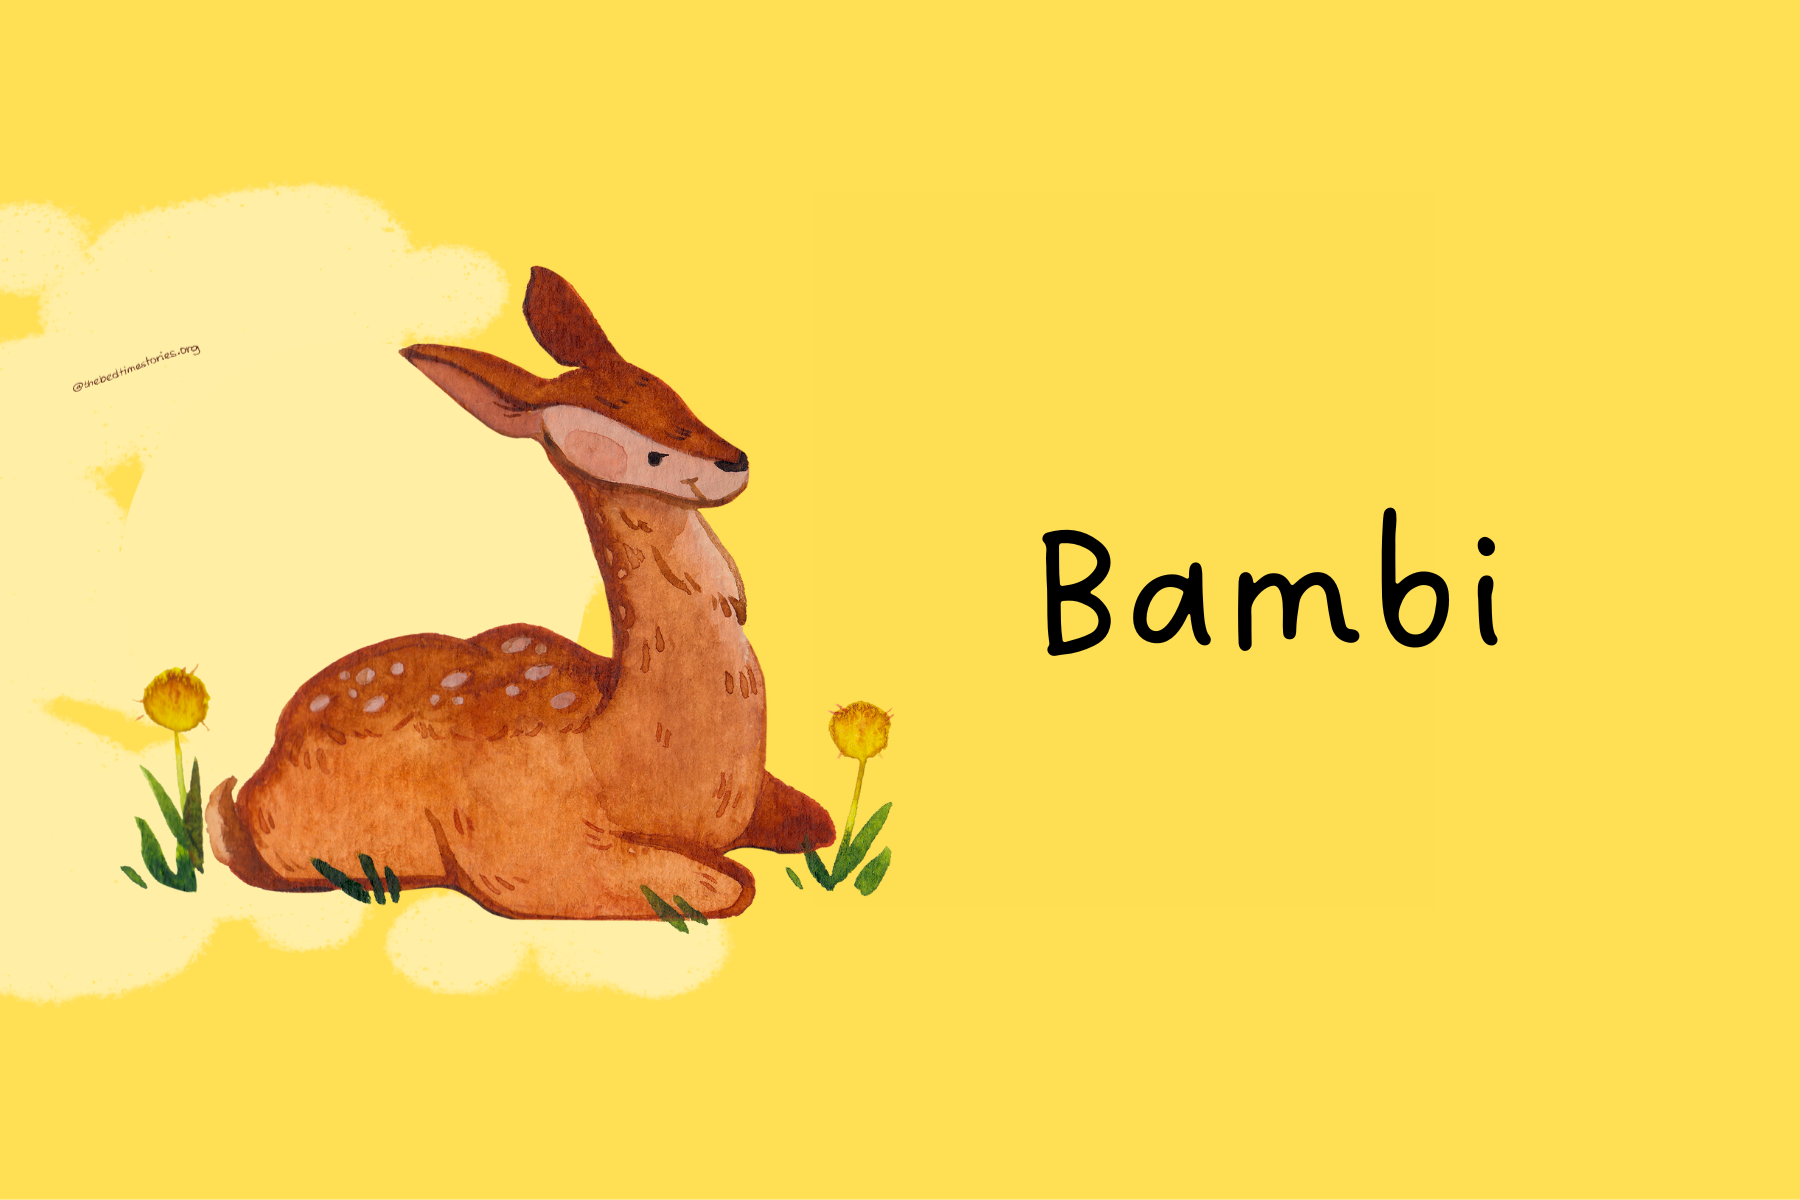 Bambi Bedtime Story: 10+ Interesting Facts on Cute Animals From Bambi’s Story